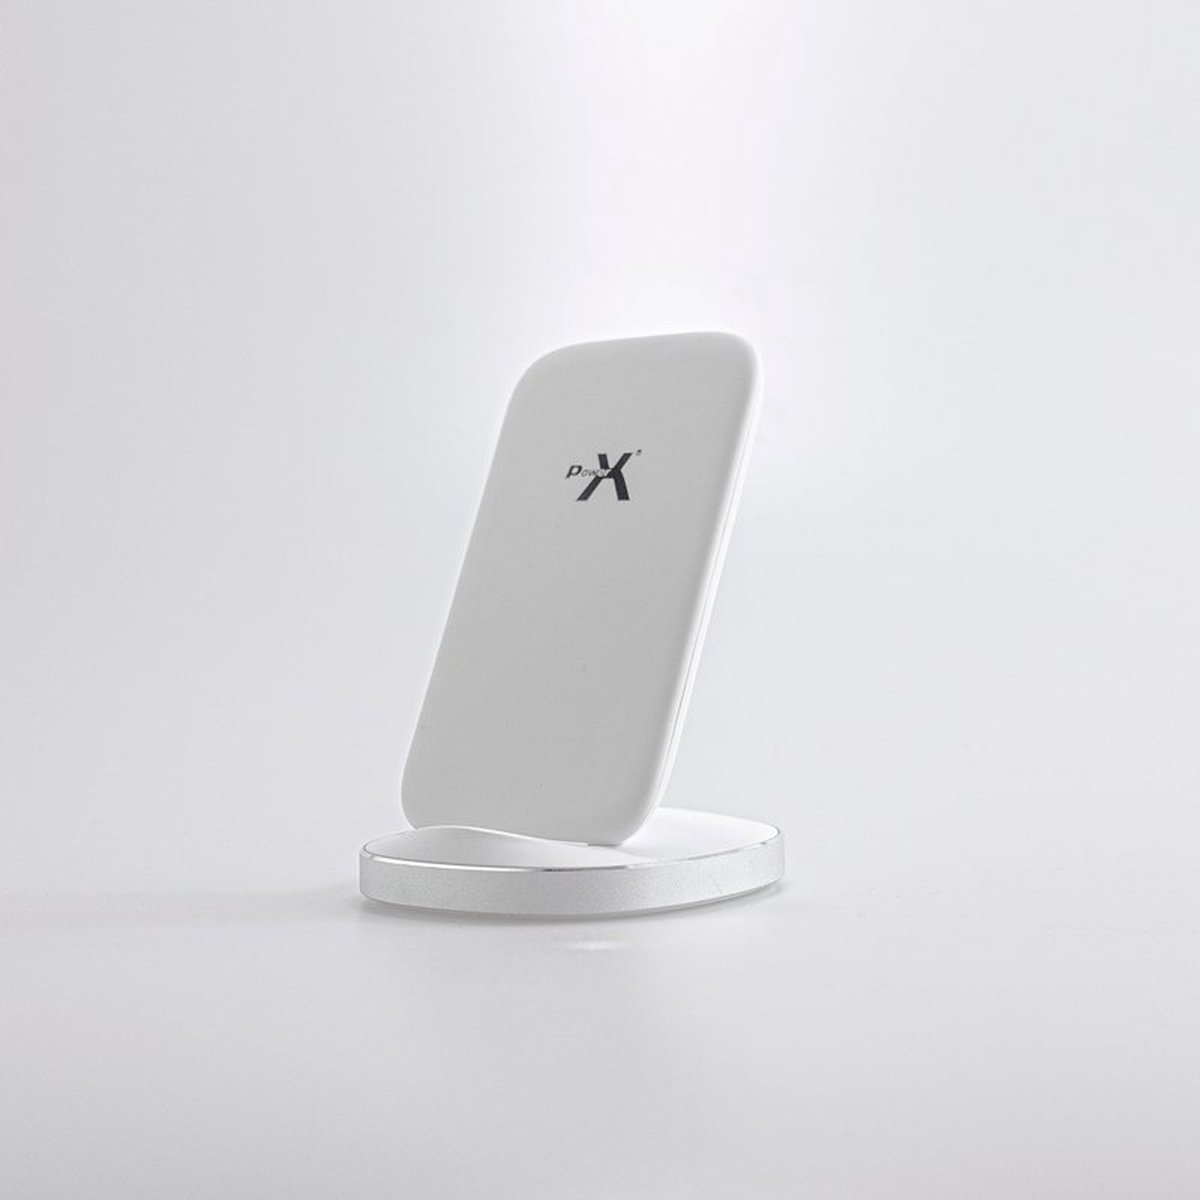 Power X 15W Draadloos FAST-CHARGING Stand - Wit - Type-C aansluiting